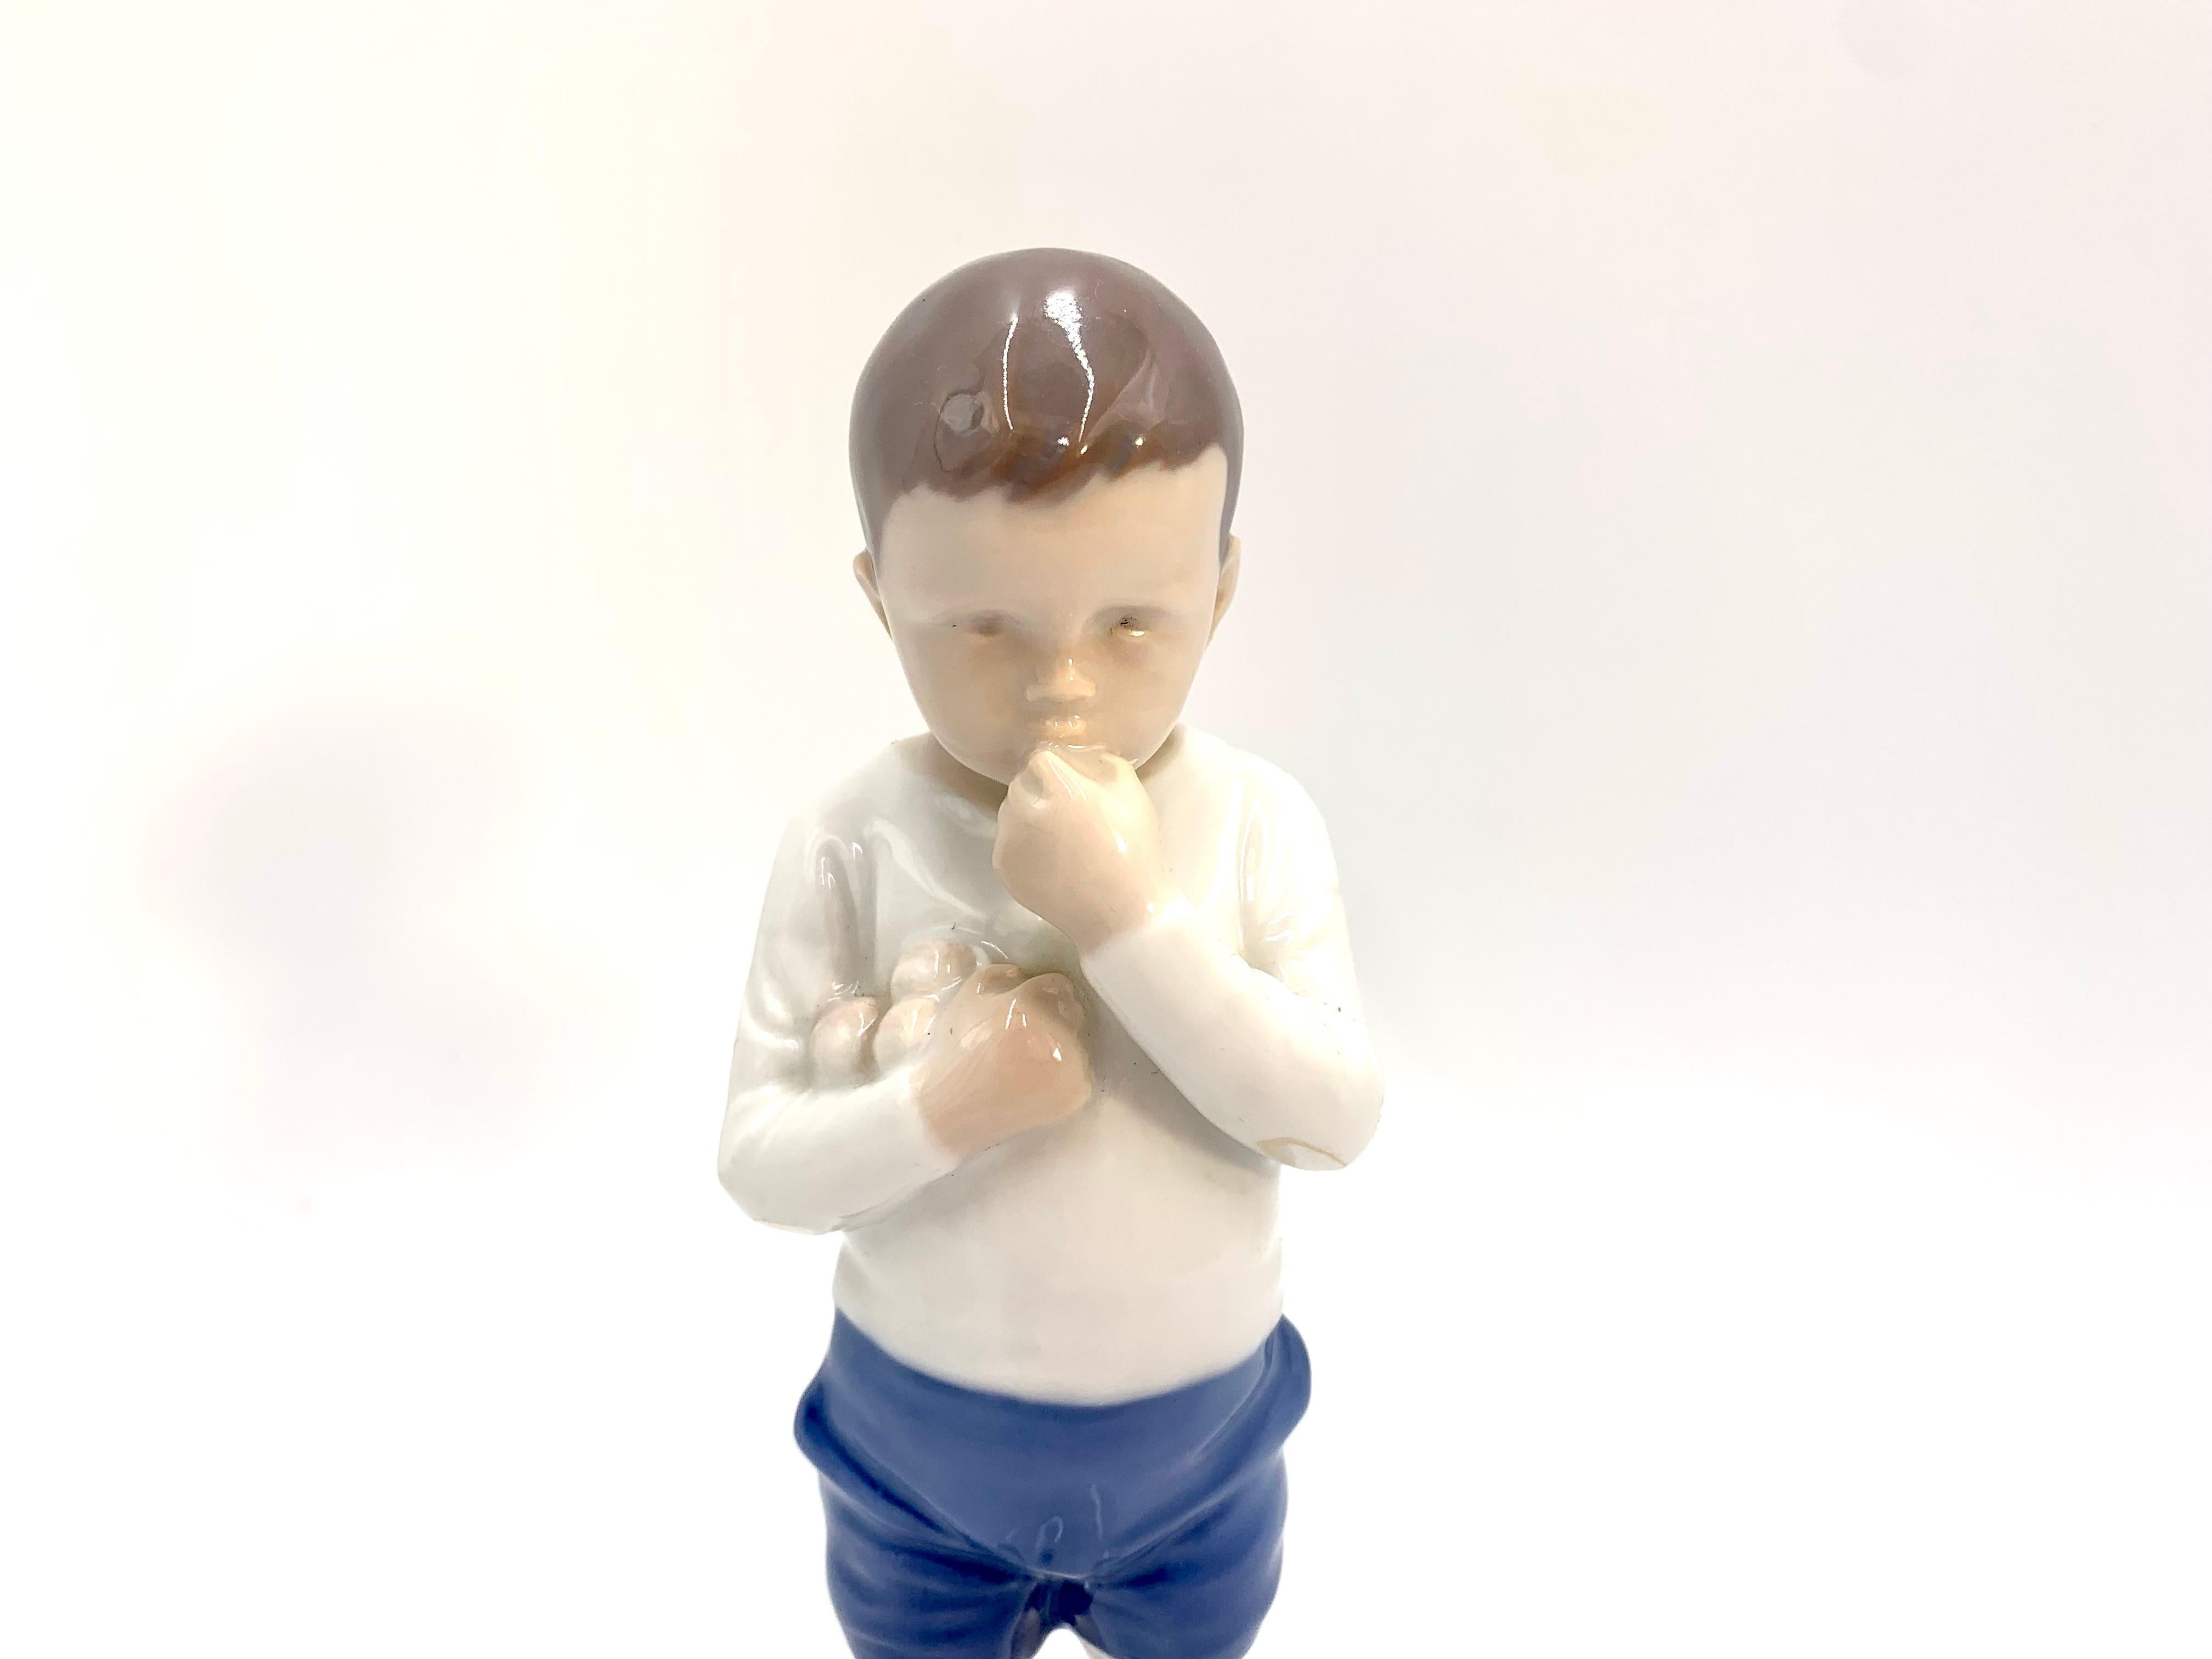 Porcelain figurine of a boy

Made in Denmark by Bing & Grondahl

Manufactured in the 1980s.

Model number #1696

Very good condition, no damage

Measures: height 18.5 cm width 5.5 cm depth 6 cm.